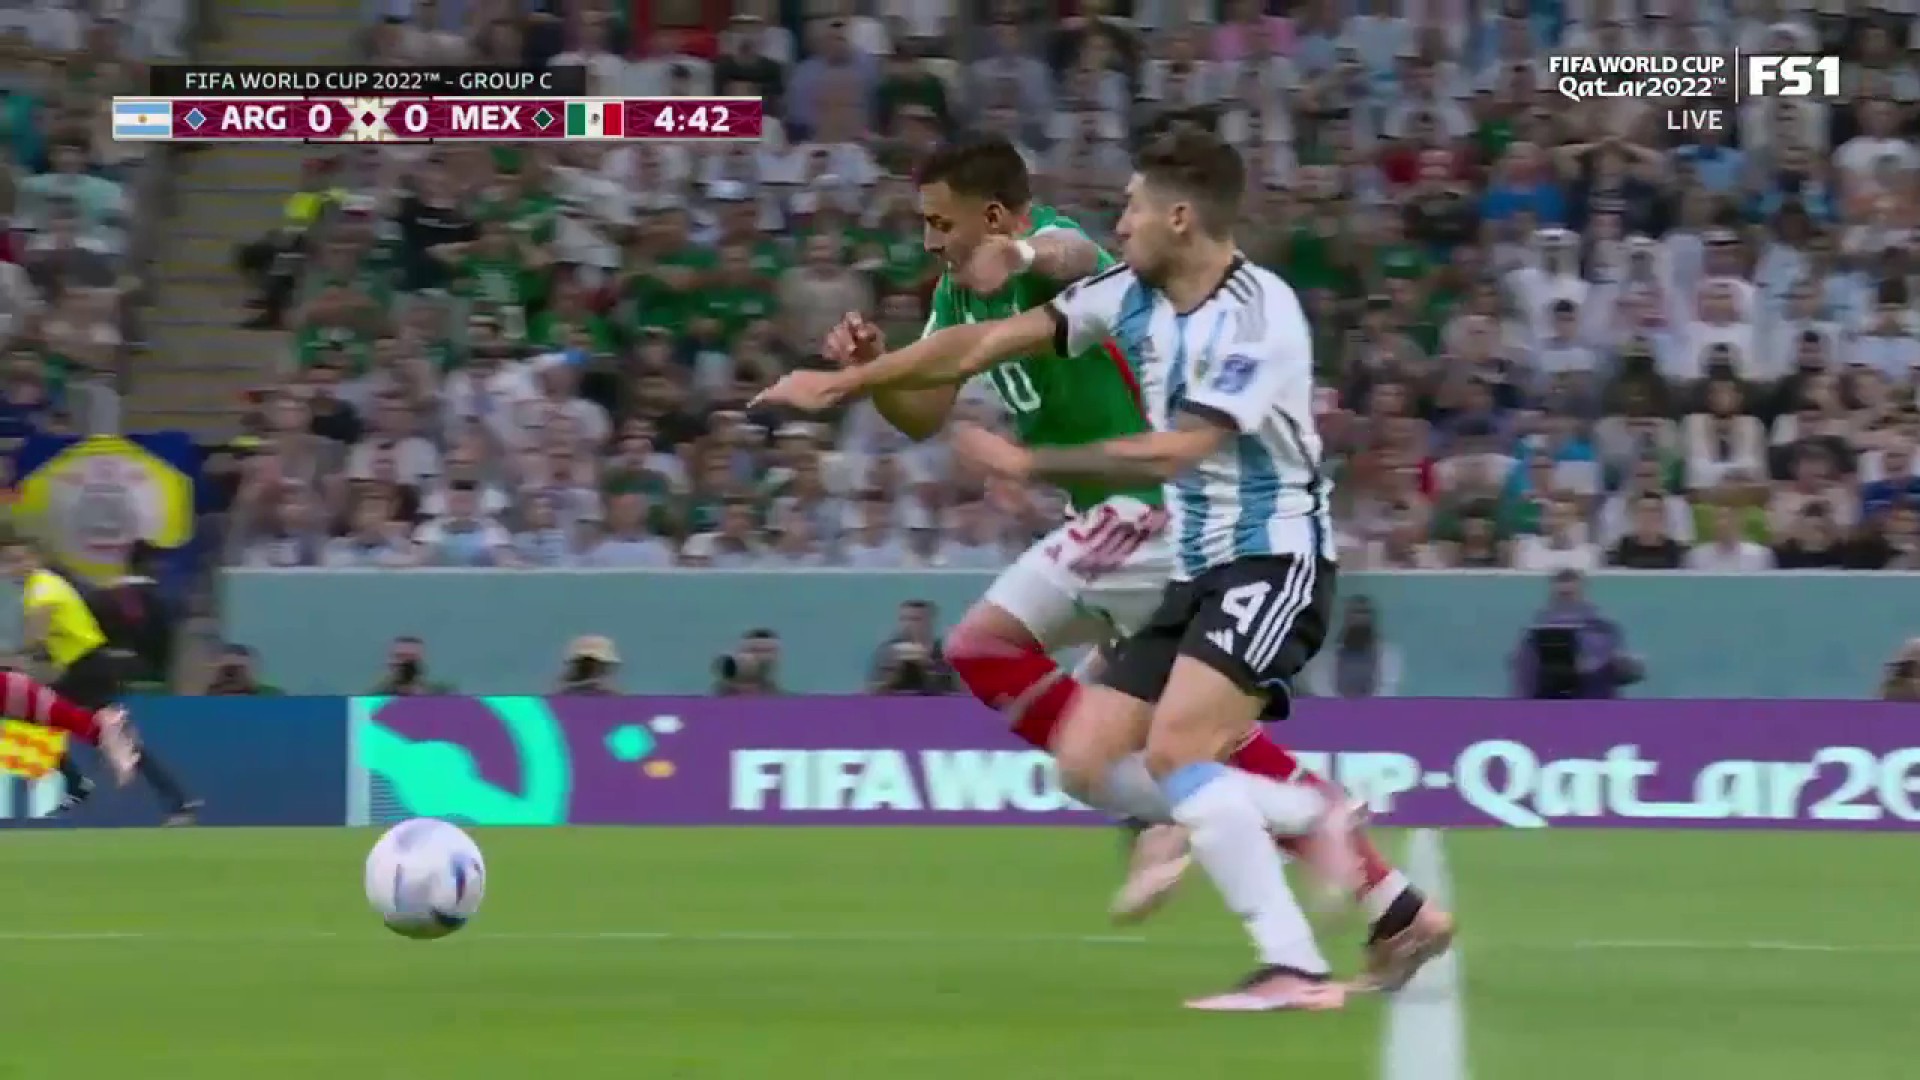 Things are already getting physical between Mexico and Argentina 👀”